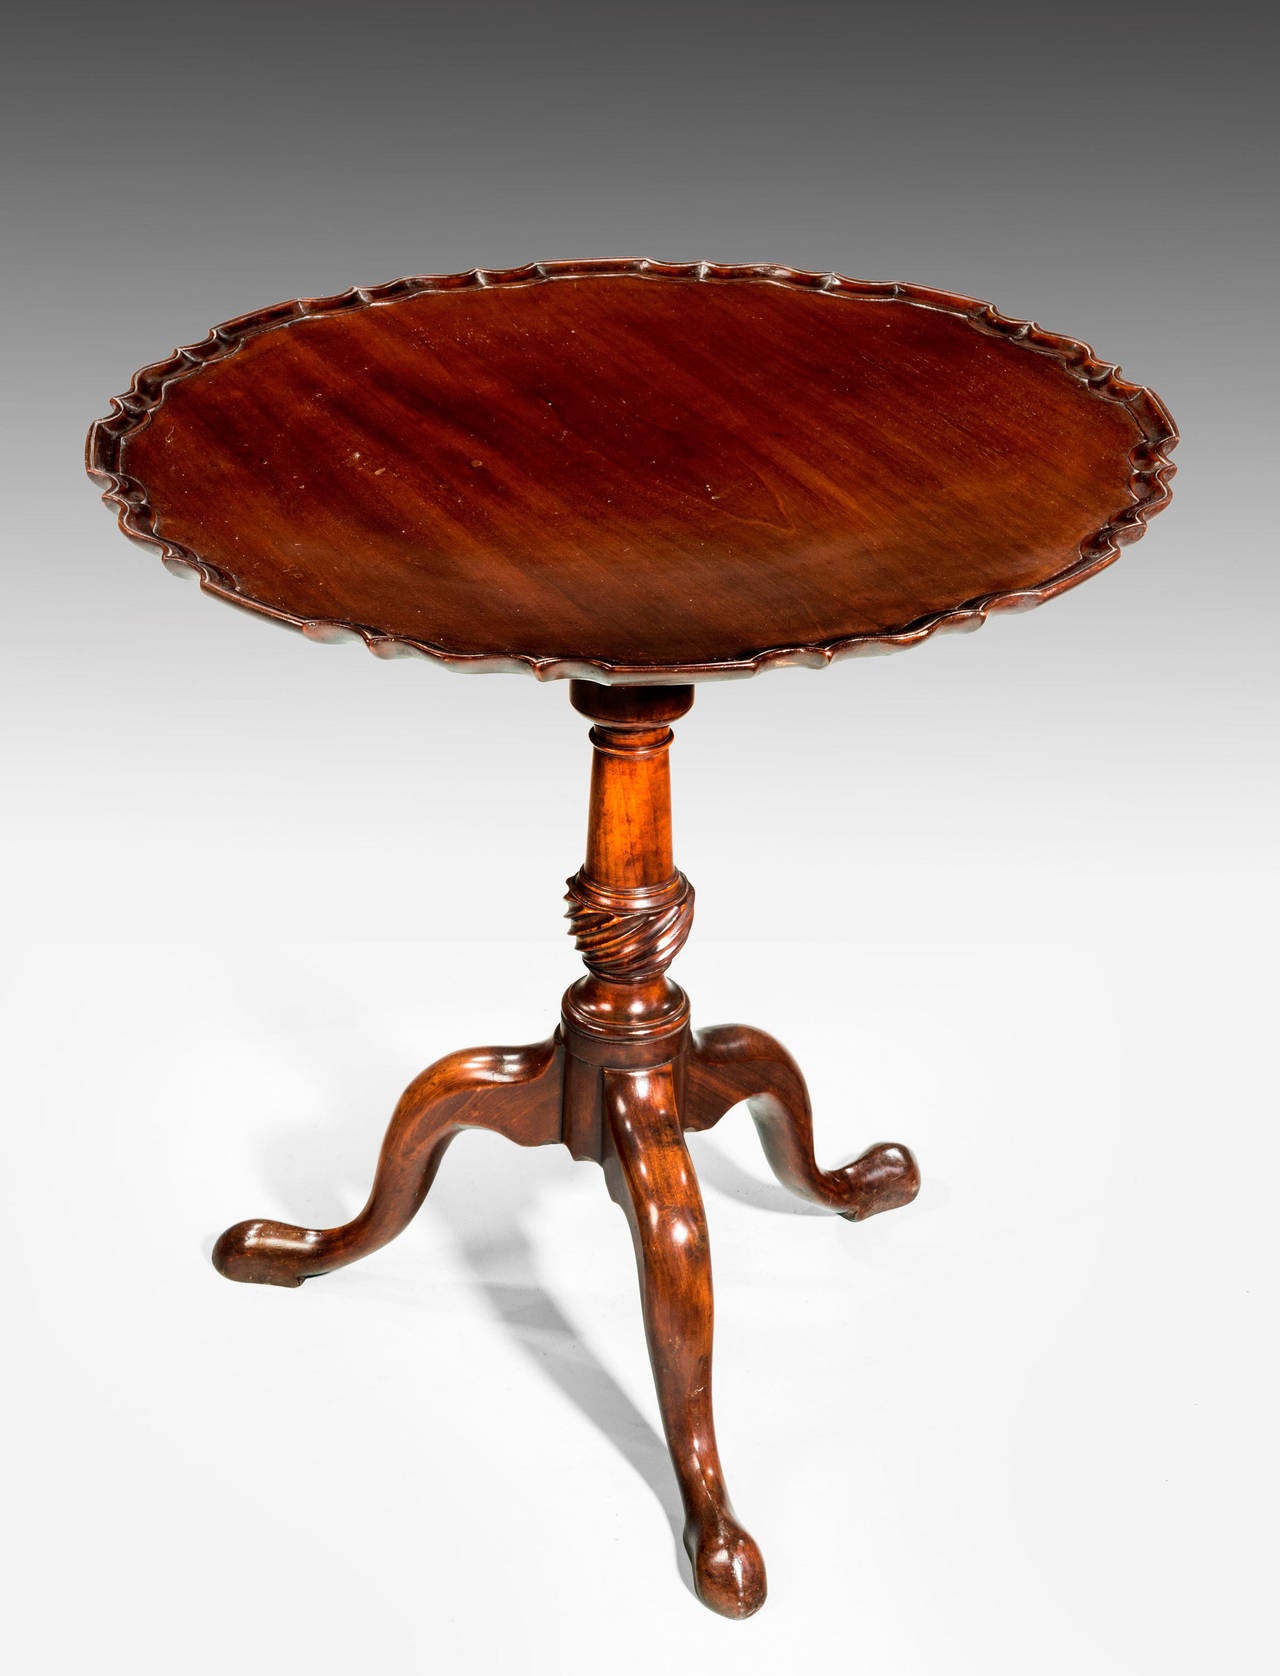 George III period Dish Top Table, the shaped centre support finely carved over cabriole legs.The top with a bird cage action with a scalloped border to the top edge, dating from the last quarter of the eighteen century.

RR